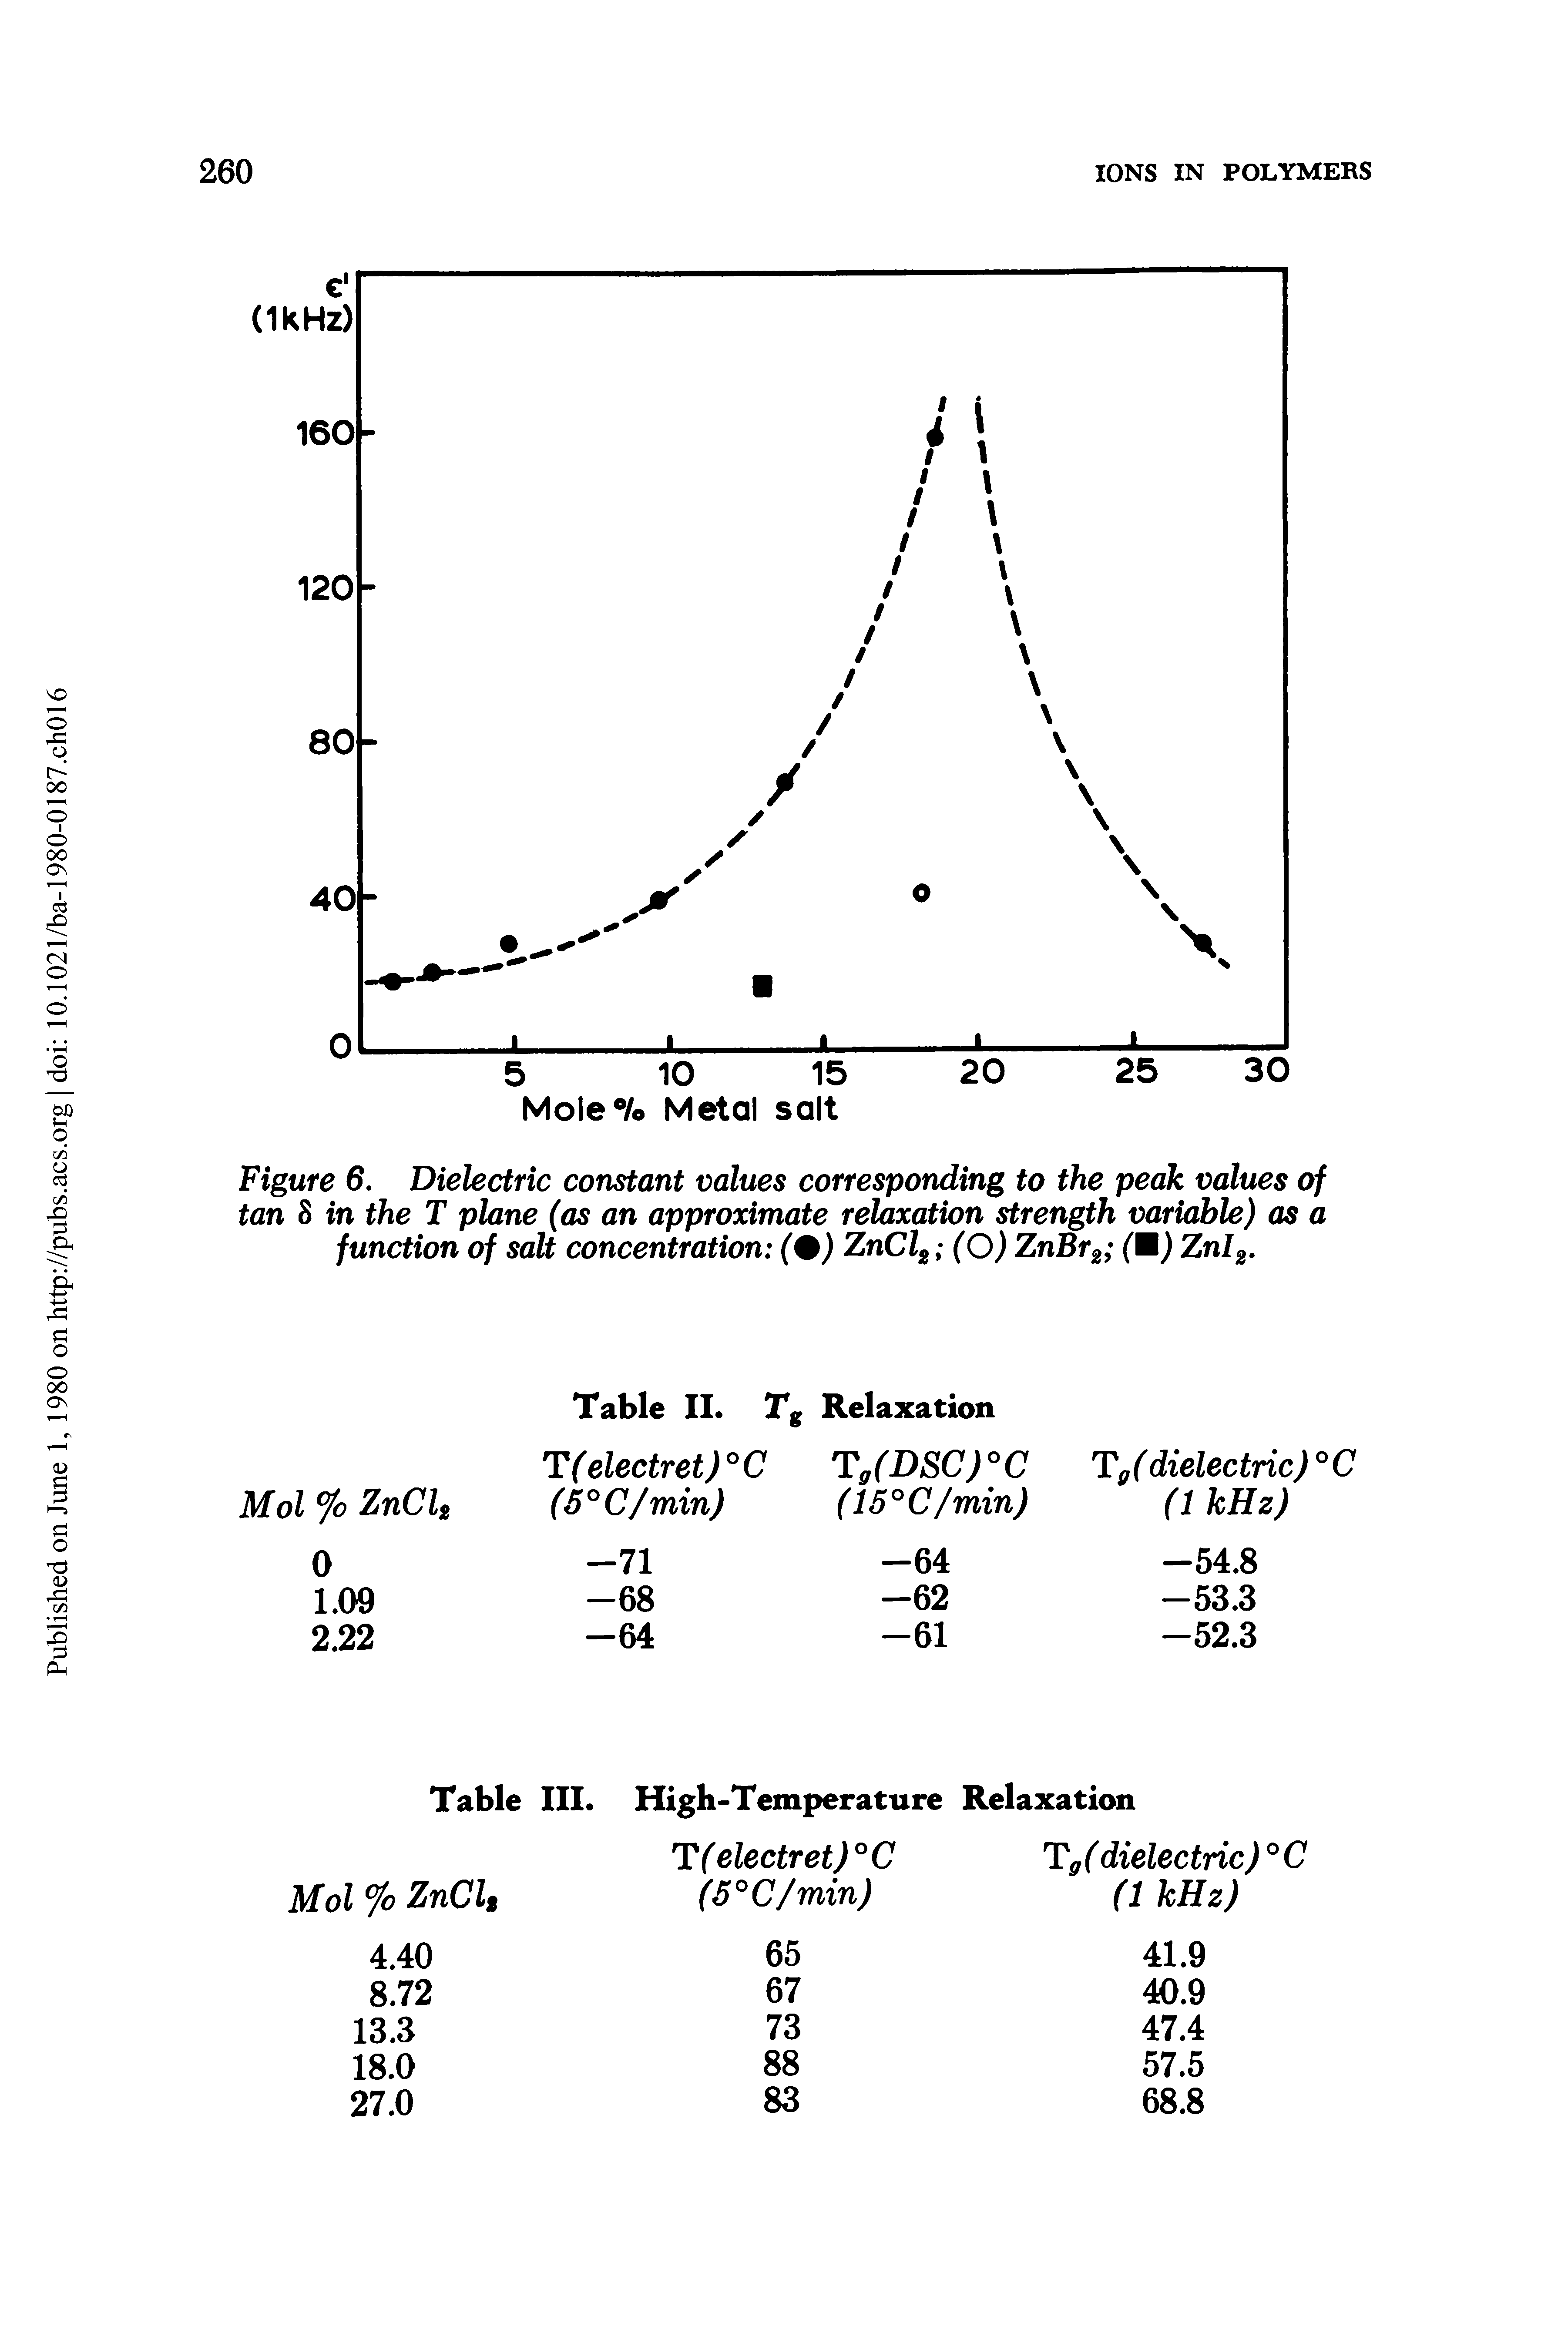 Figure 6. Dielectric constant values corresponding to the peak values of tan 8 in the T plane (as an approximate relaxation strength variable) as a function of salt concentration (9) ZnClt (O) ZnBr2 (M) Znls.